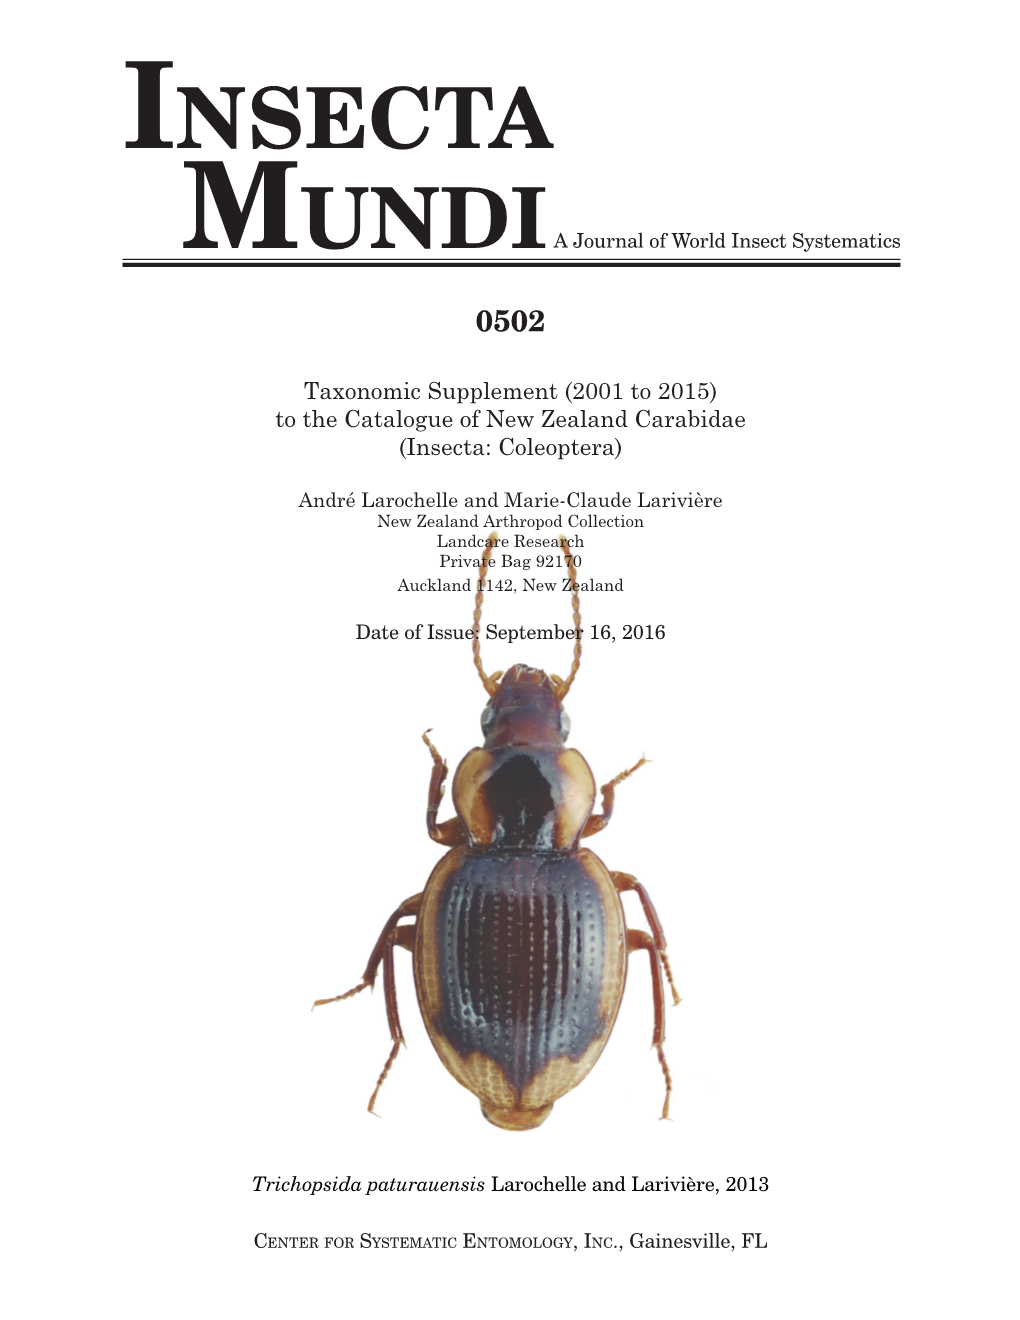 Taxonomic Supplement (2001 to 2015) to the Catalogue of New Zealand Carabidae (Insecta: Coleoptera)